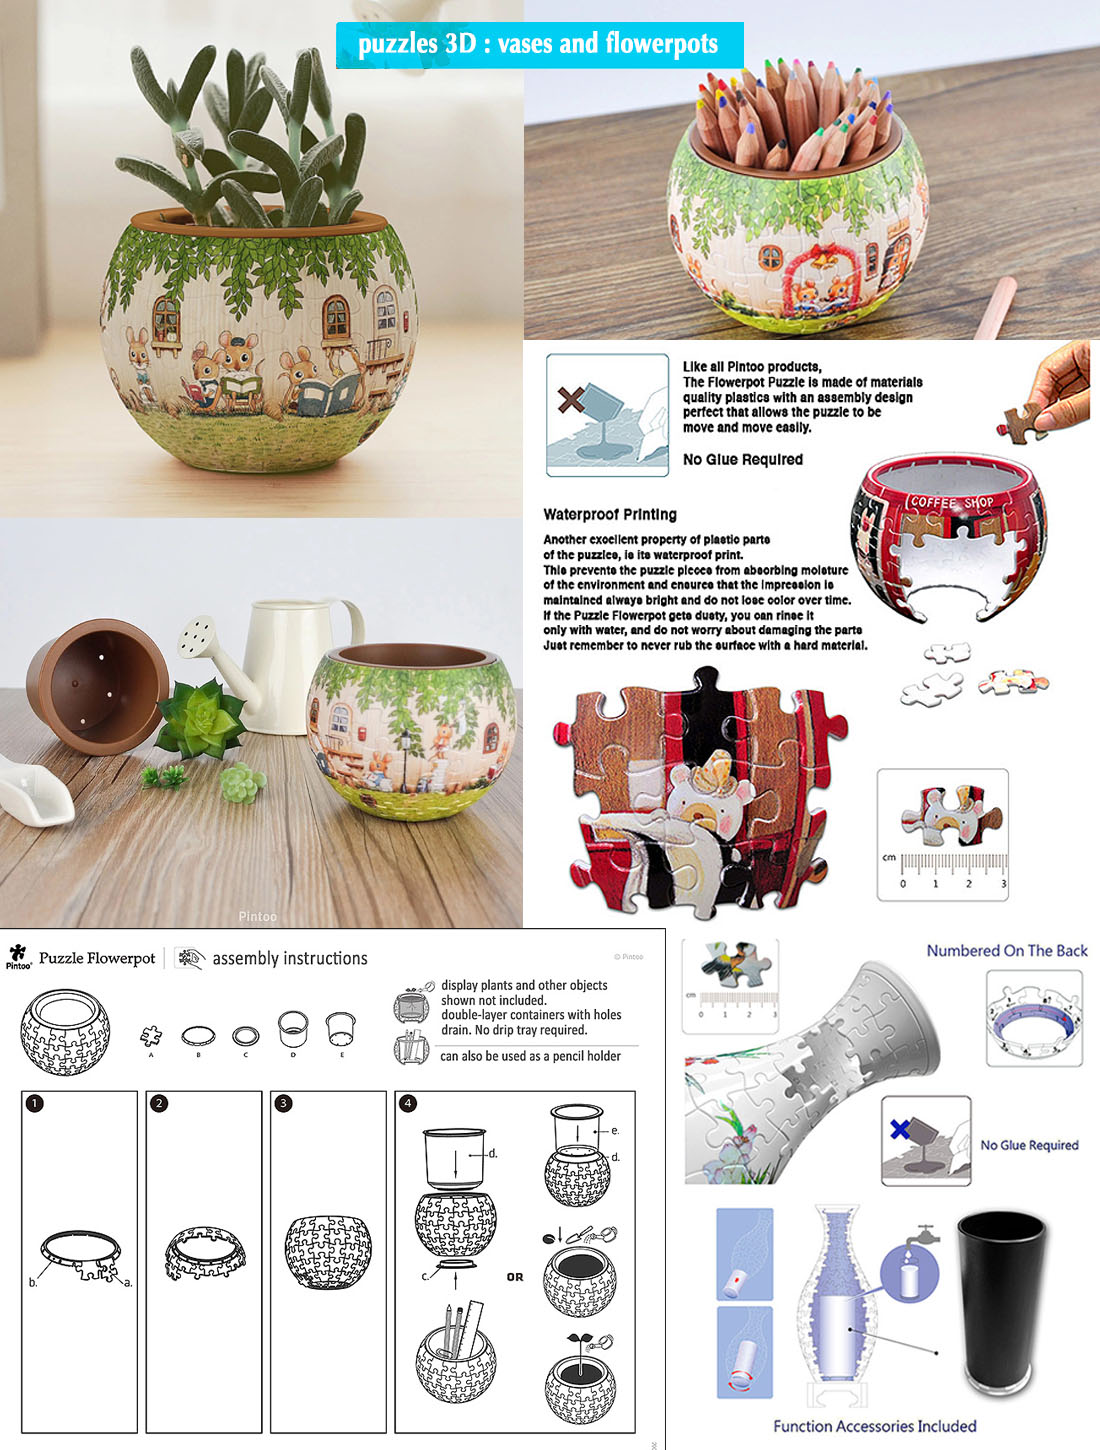 information about the extraordinary 3D puzzles vases & flowerpots Pintoo brand